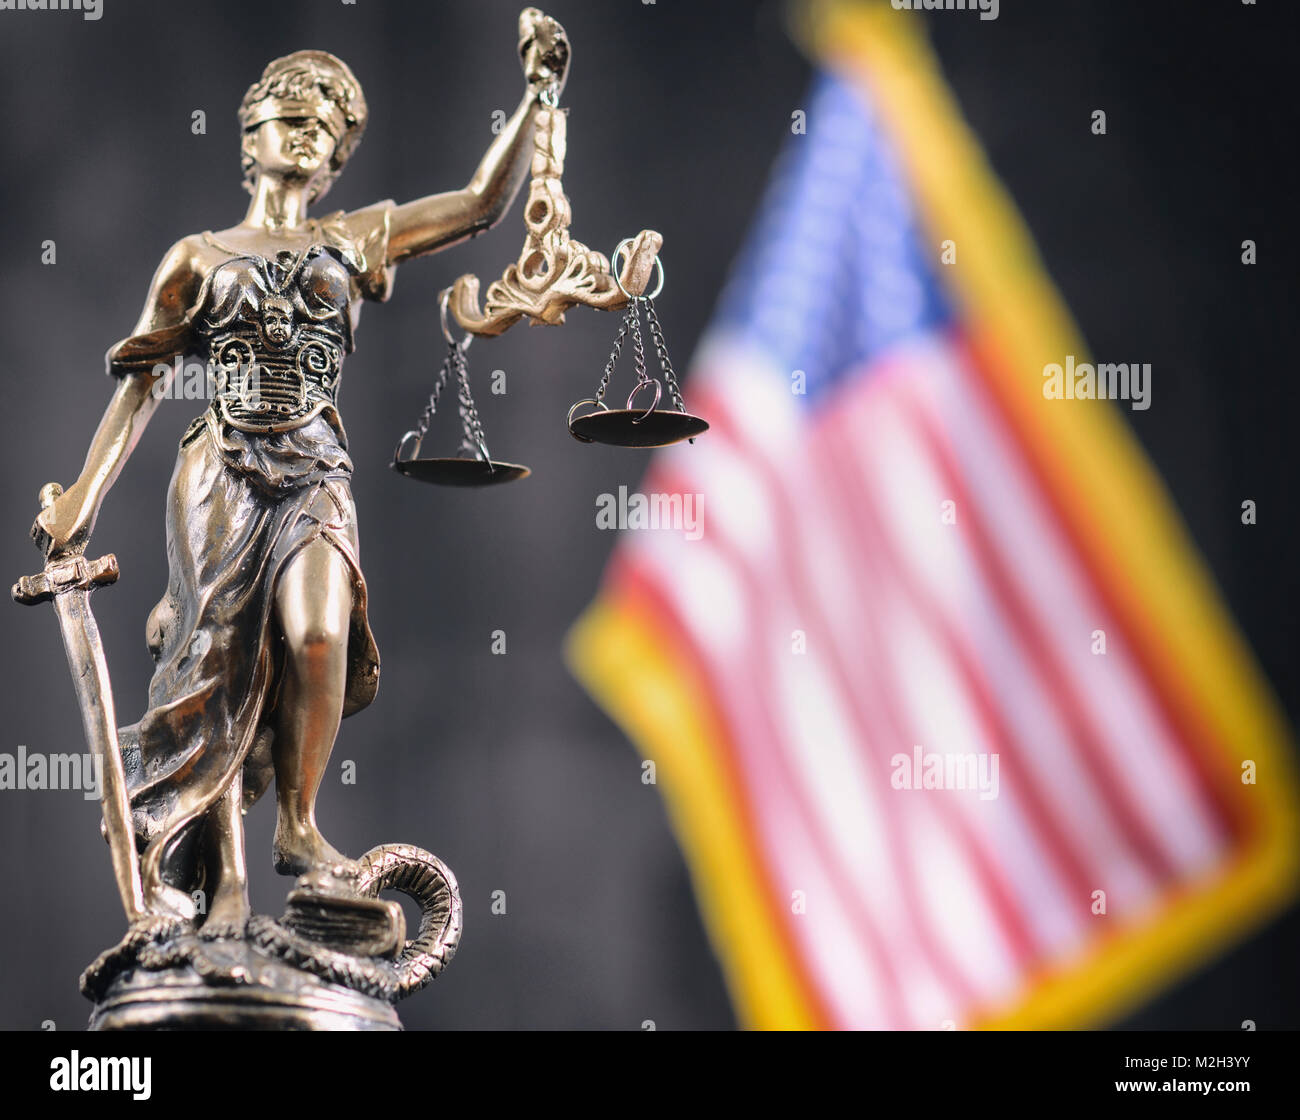 Law and Justice, Legality concept, Scales of Justice, Justitia, Lady Justice in front of the American flag in the background. Stock Photo